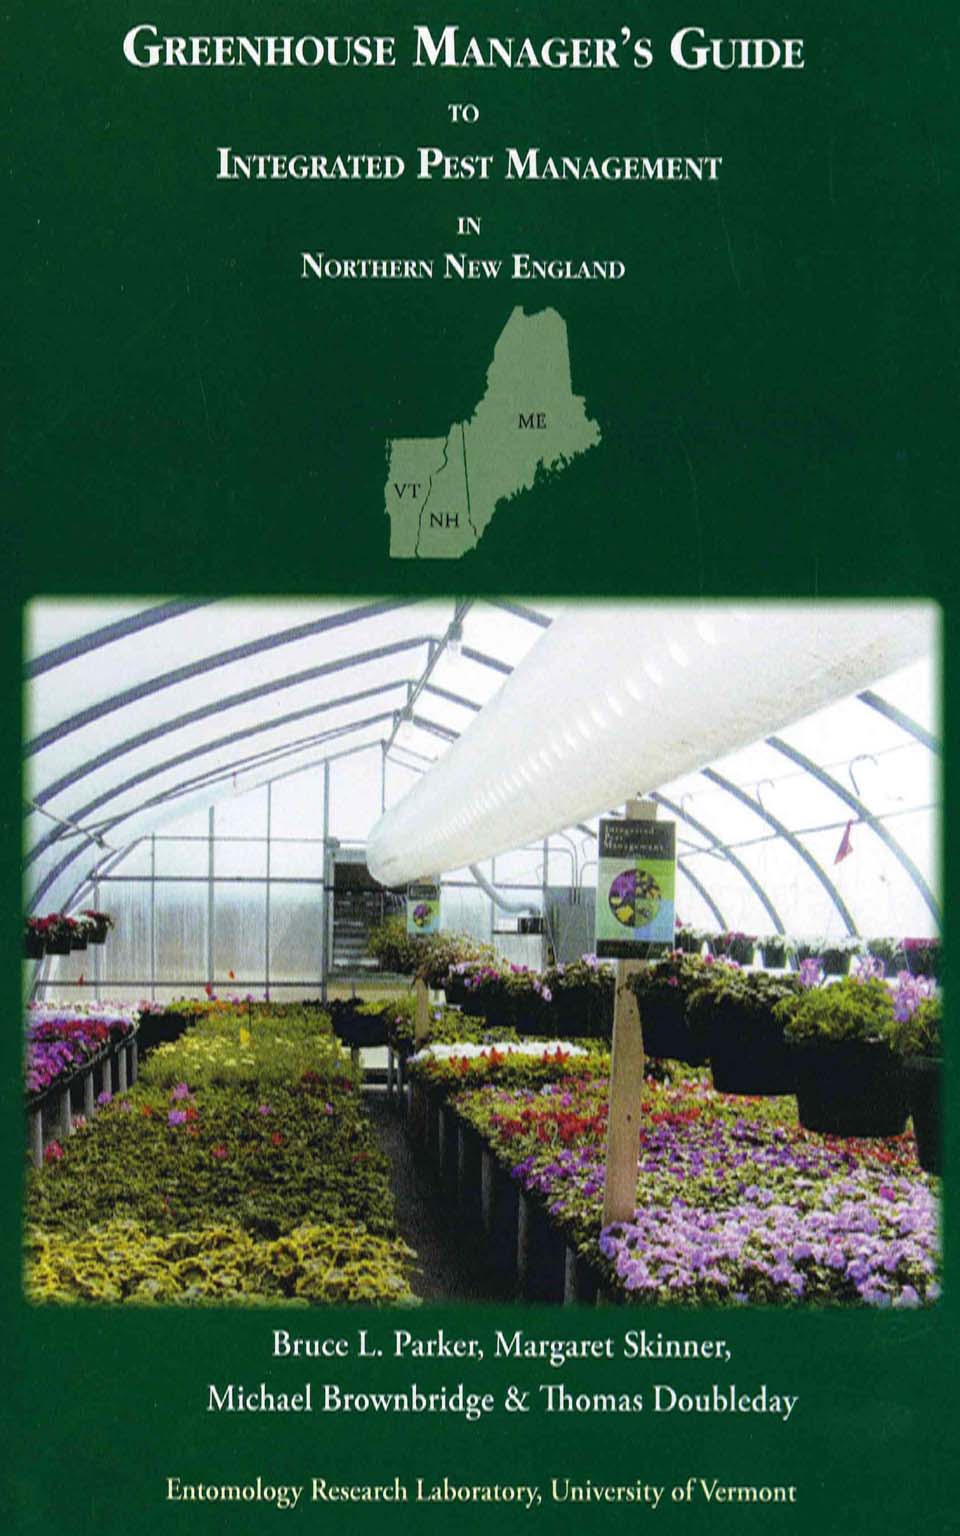 Guide Cover